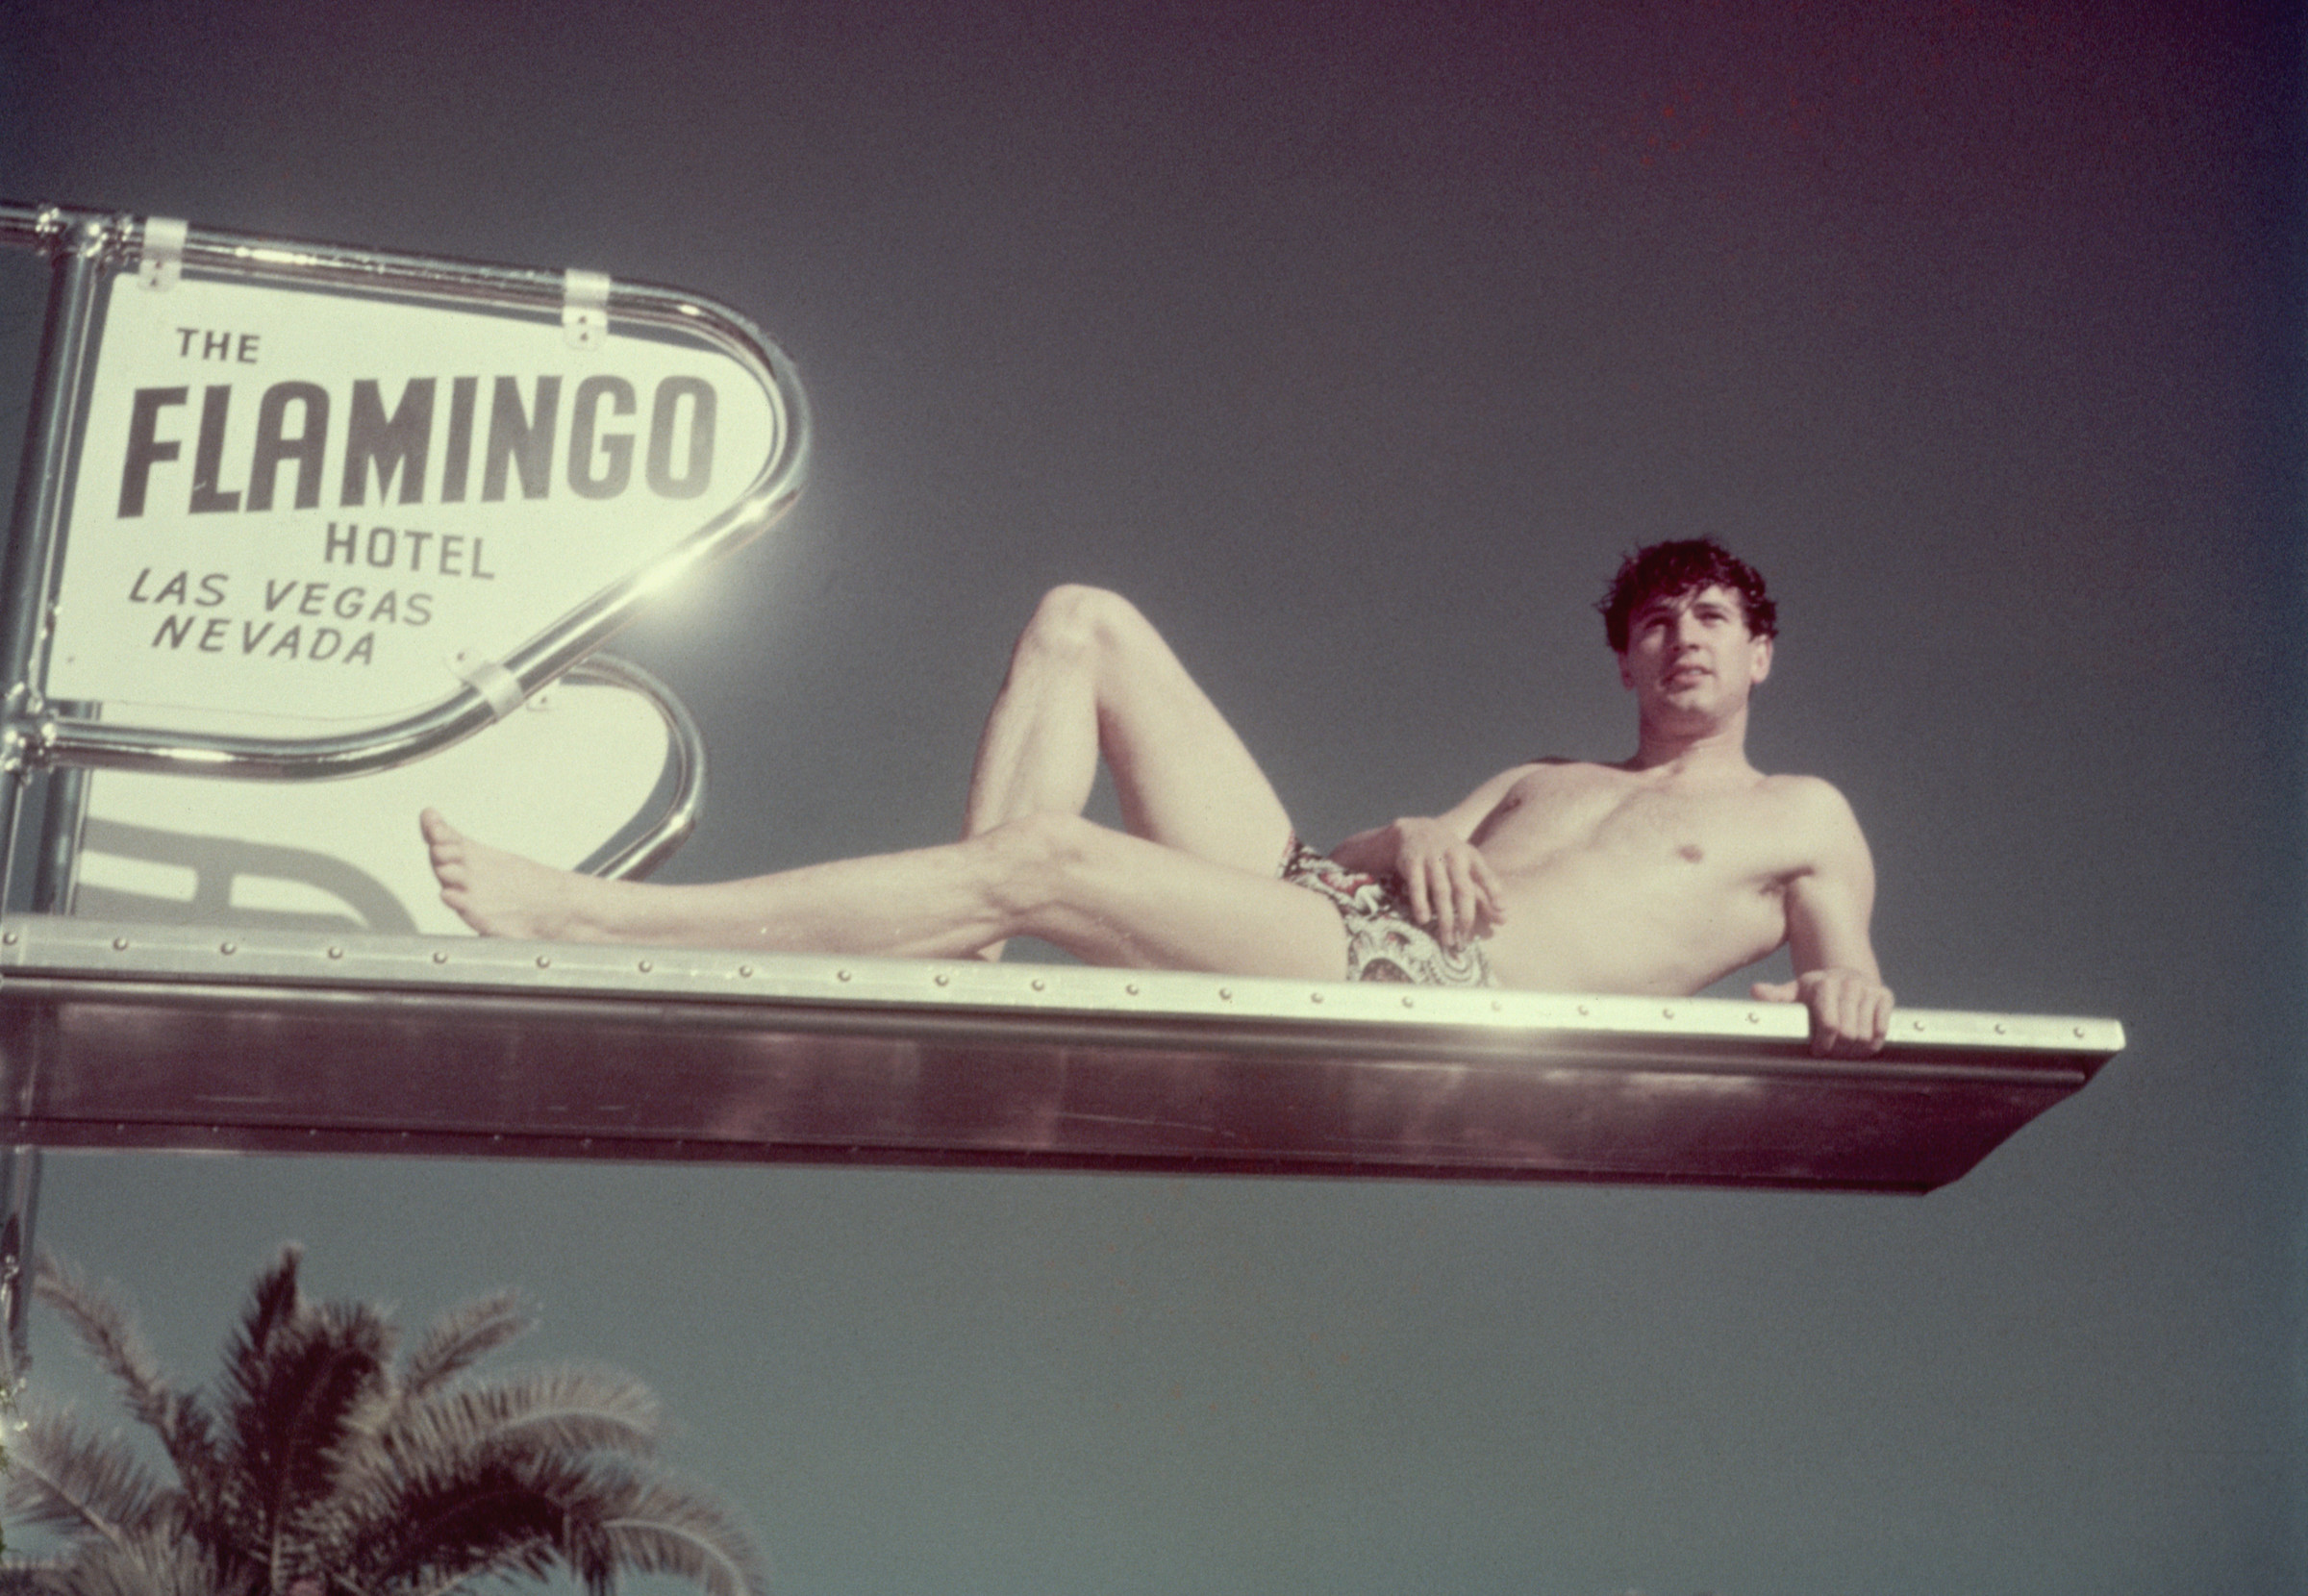 ca. 1940-1959, Las Vegas, Nevada, USA --- Original caption: Las Vegas: Photo shows Rock Hudson (1925-1985) lying sideways on the diving board of the pool at the Flamingo Hotel in Las Vegas. Ca. 1940s-1950s. --- Image by © CORBIS